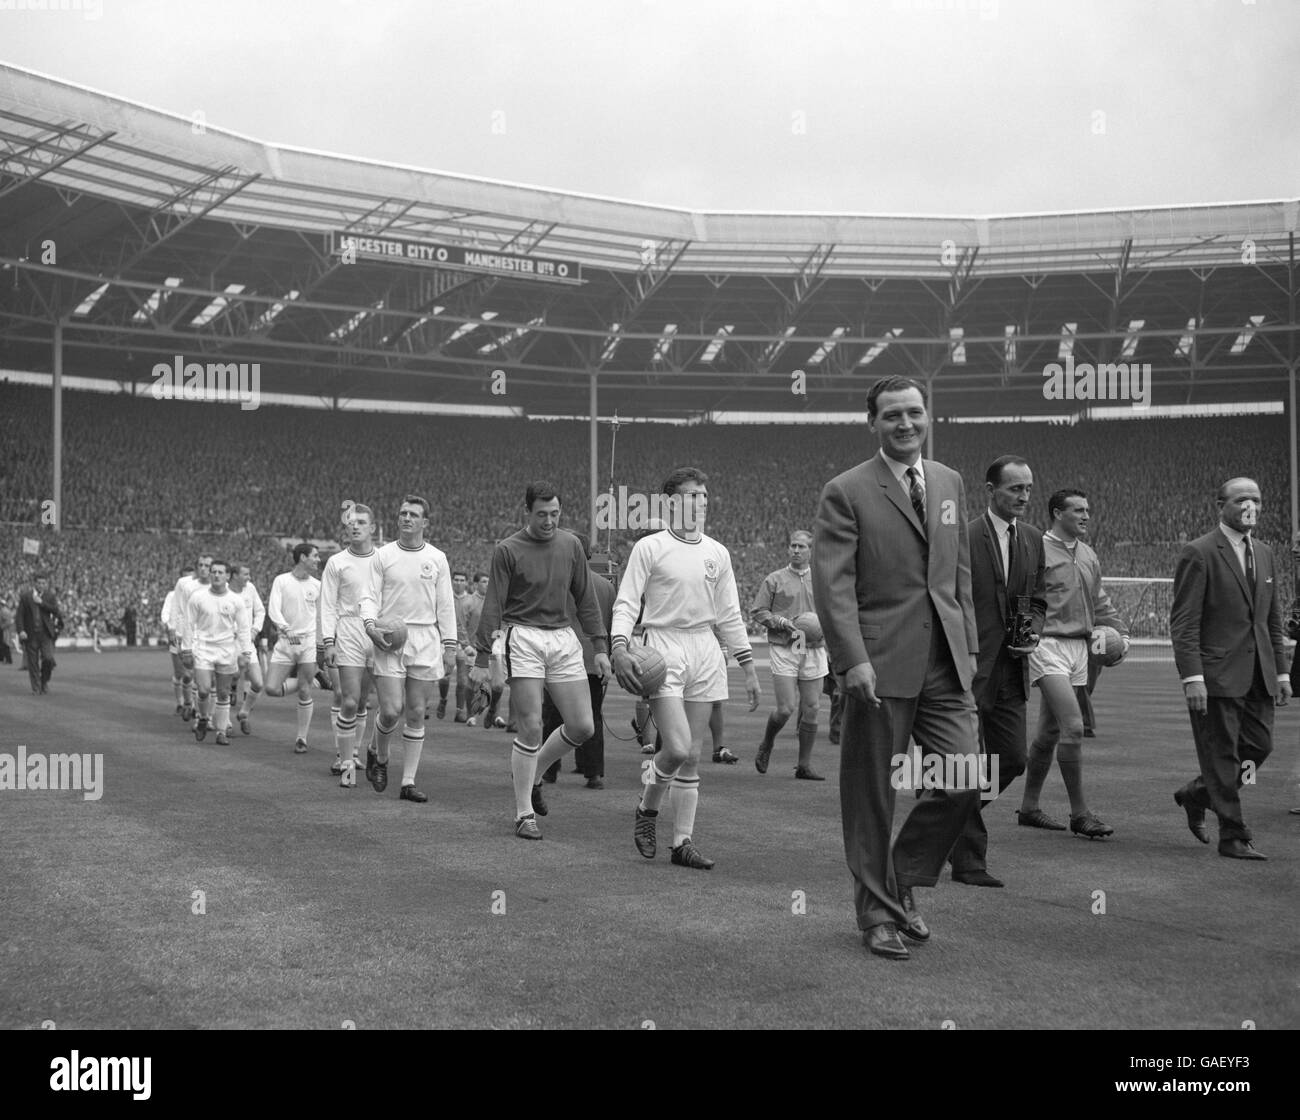 Leicester City Manager Matt Gillies leads out Captain Colin Appleton, Gordon Banks, Ian King and john Sjoberg. Manchester United Manager Matt Busby (far right) leads out Captain Noel Cantwell and Bobby Charlton for the FA Cup final. Stock Photo